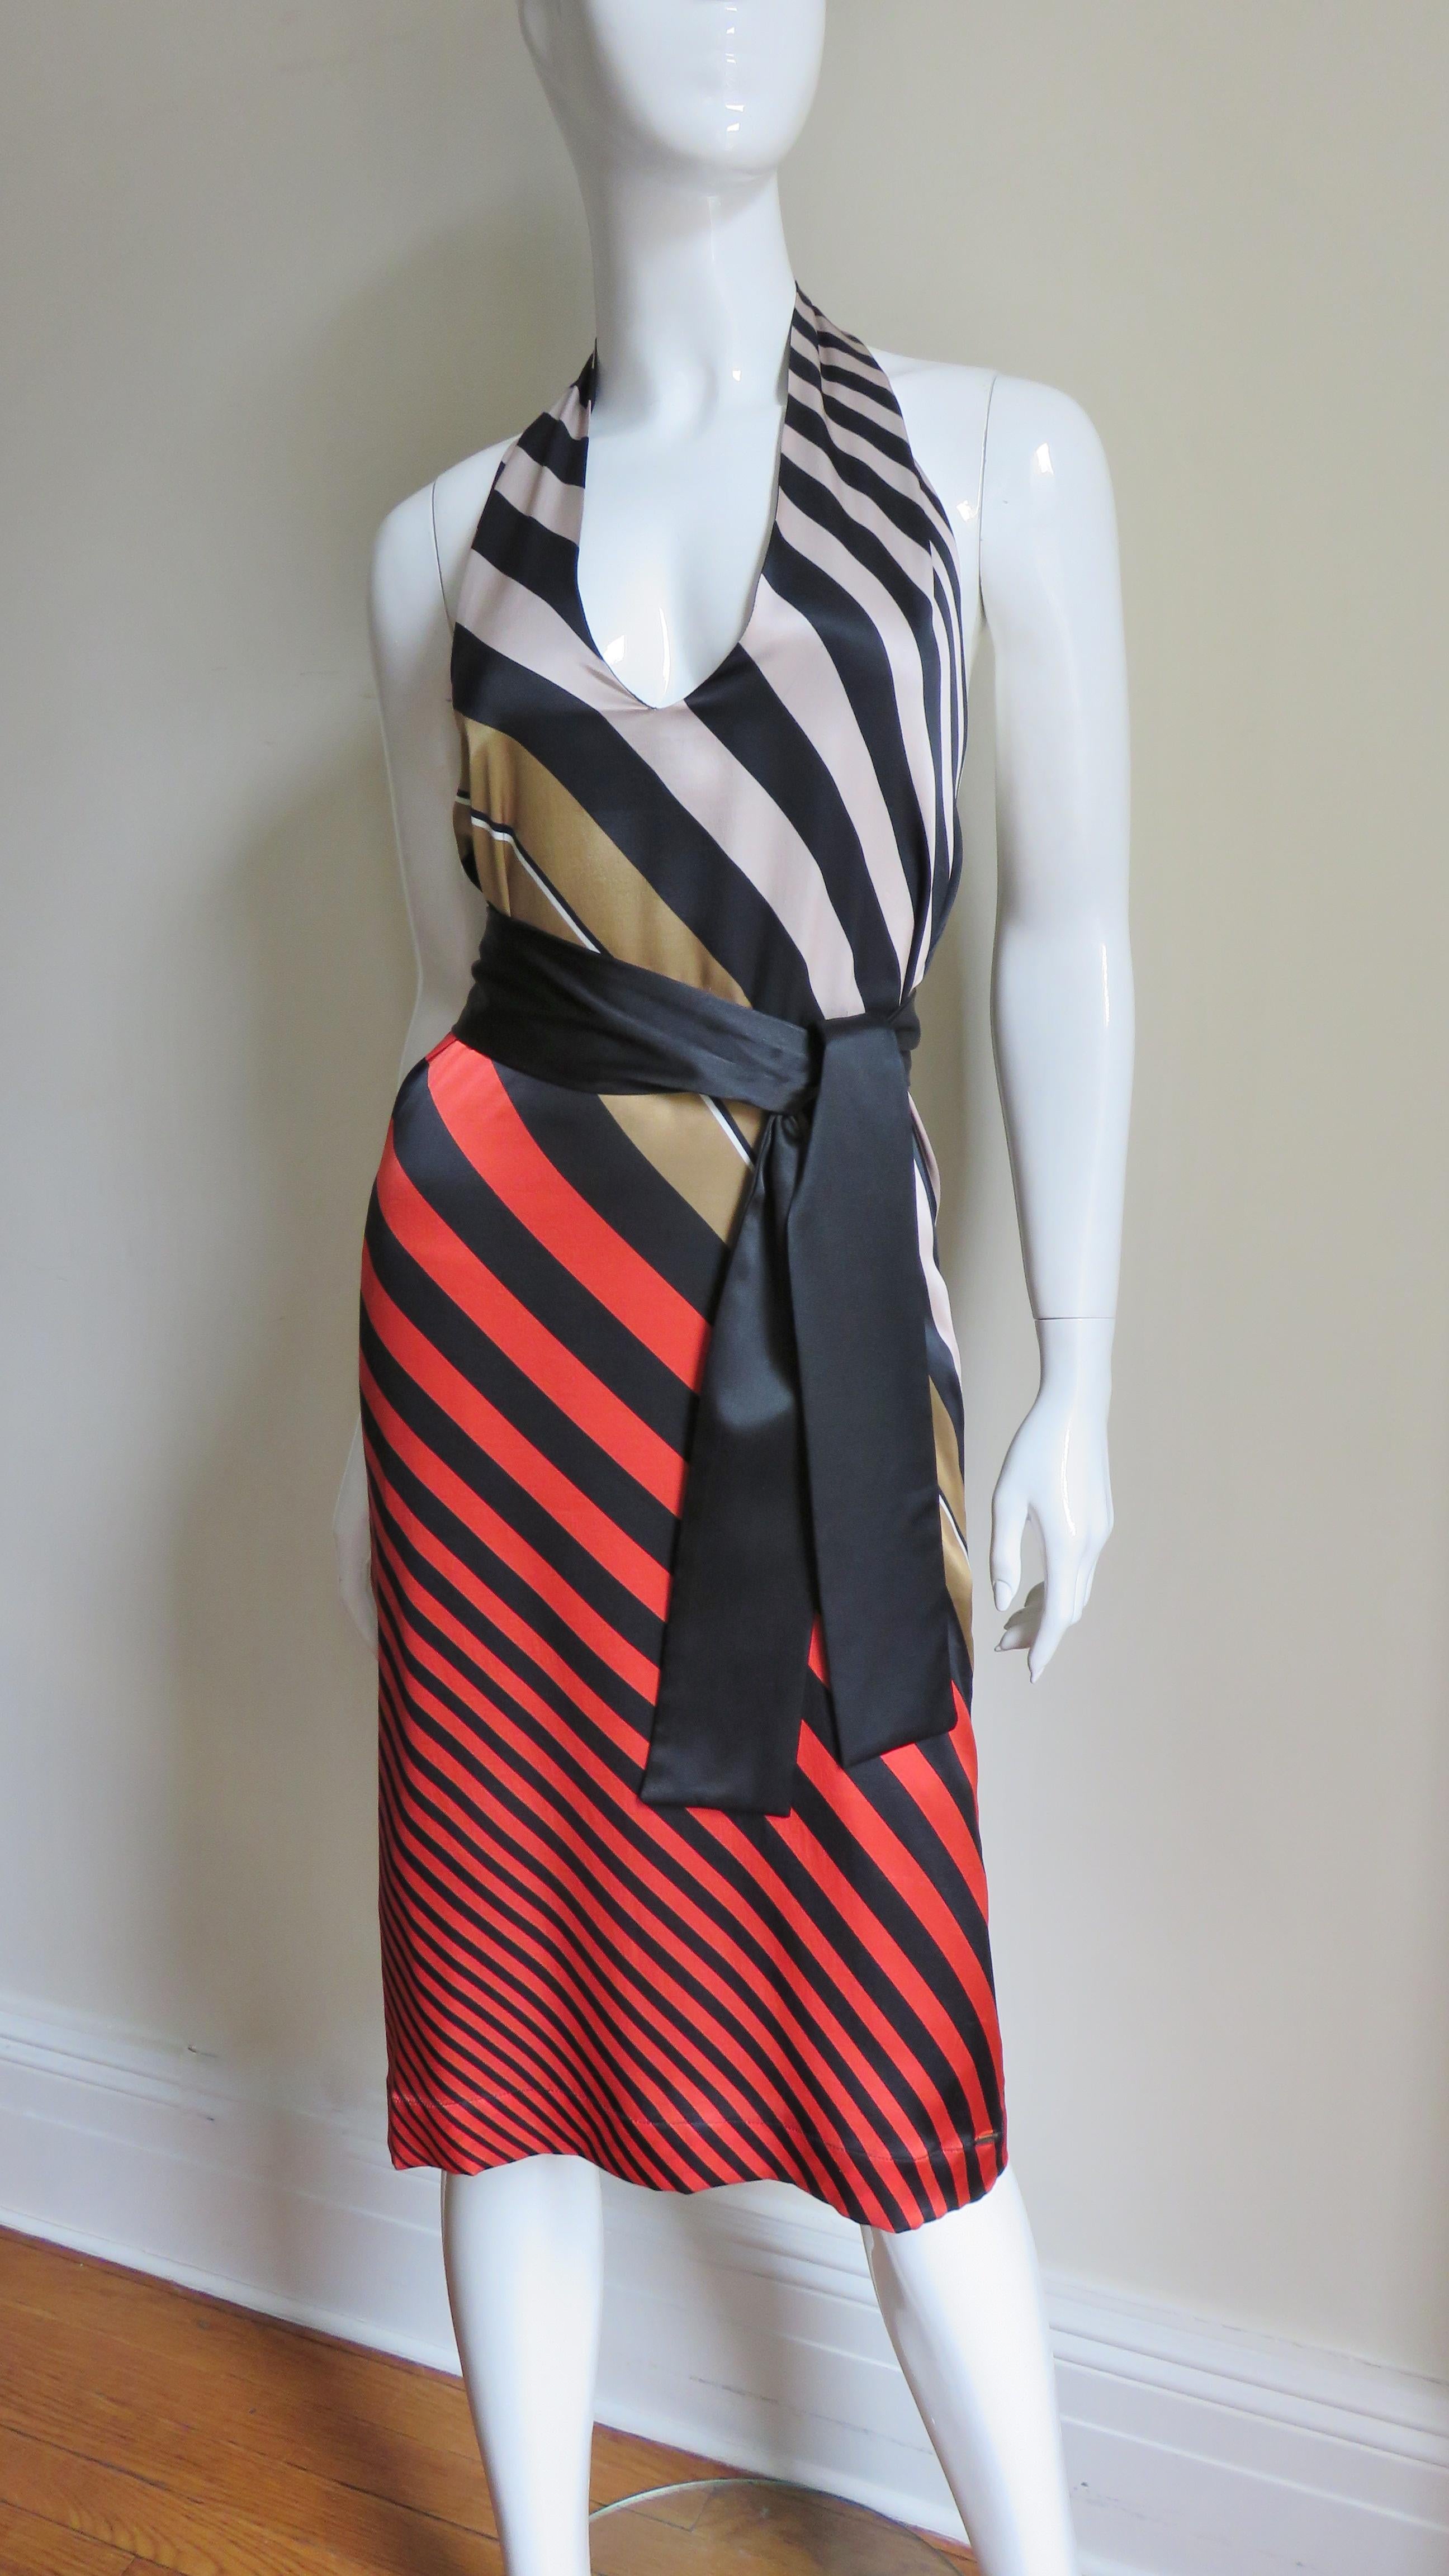 A great silk halter dress from Fendi in beige, grey, red and black angled stripes of varying widths.  It has a plunging neckline, low cut back and a black silk tie belt.  The skirt is straight and there are side seam pockets.  It is lined in black